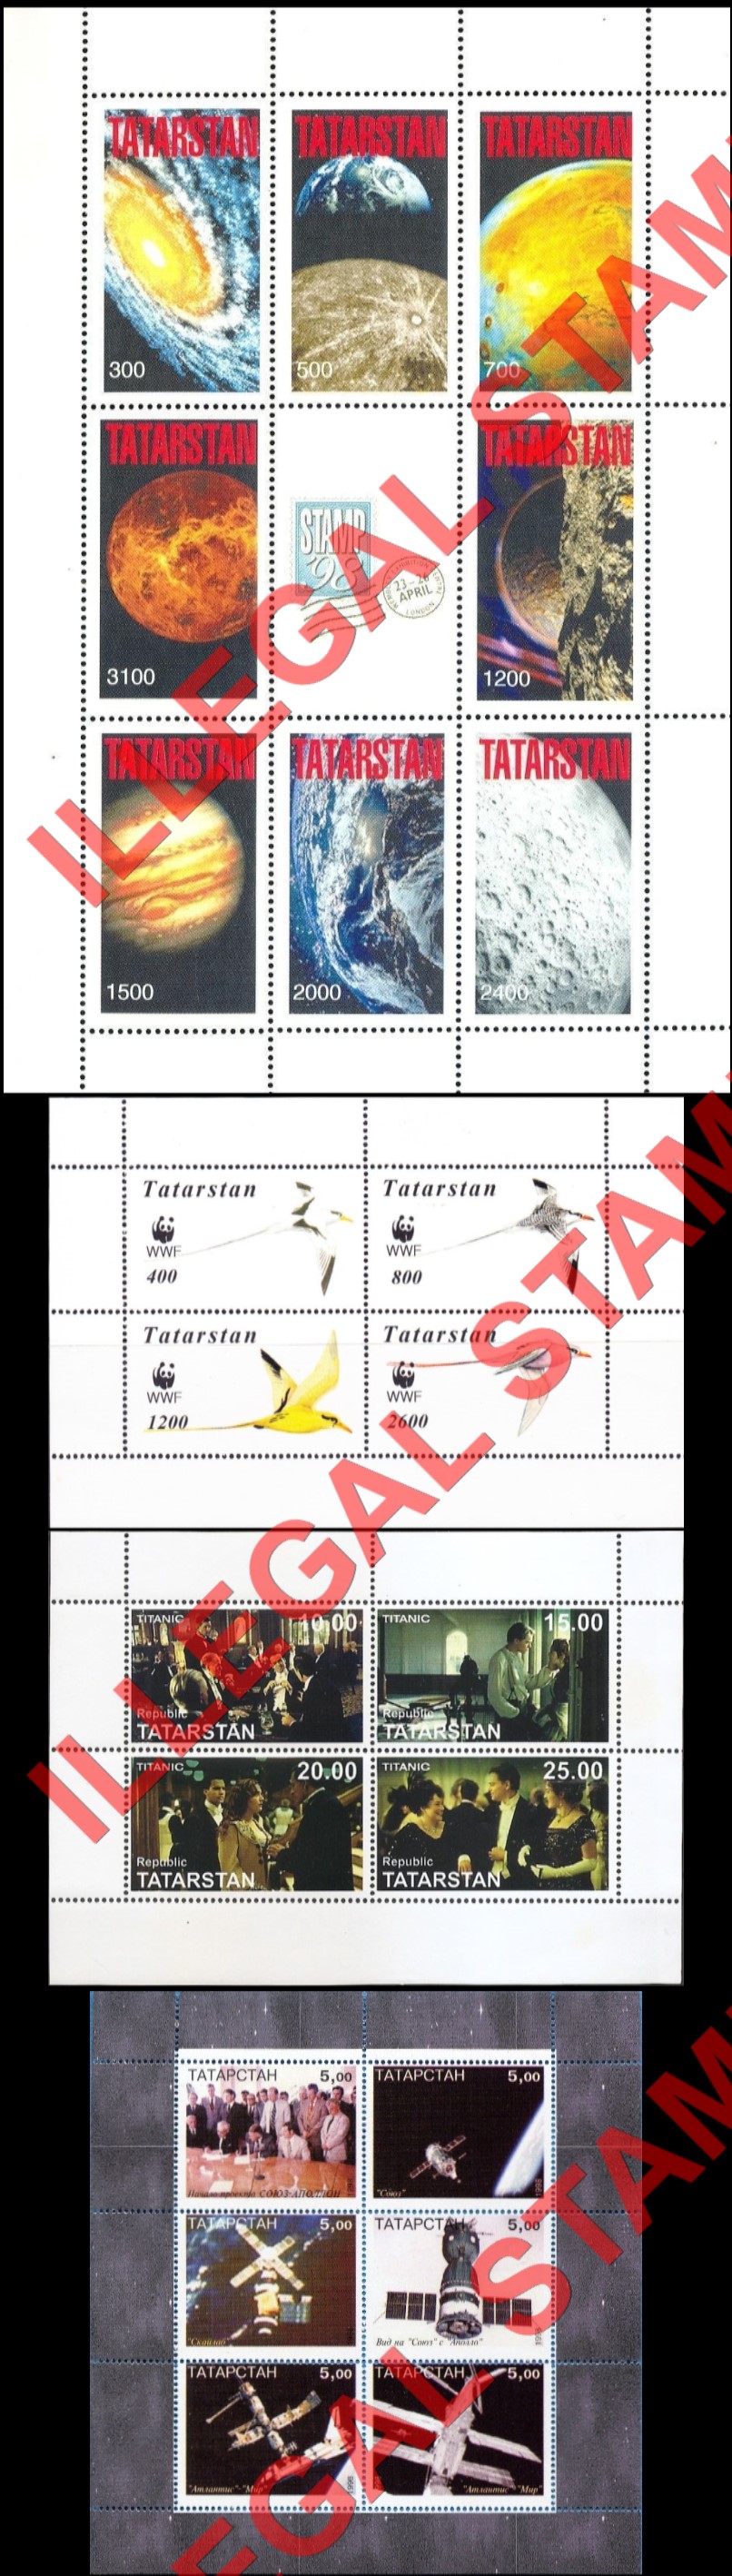 Republic of Tatarstan 1998 Counterfeit Illegal Stamps (Part 3)